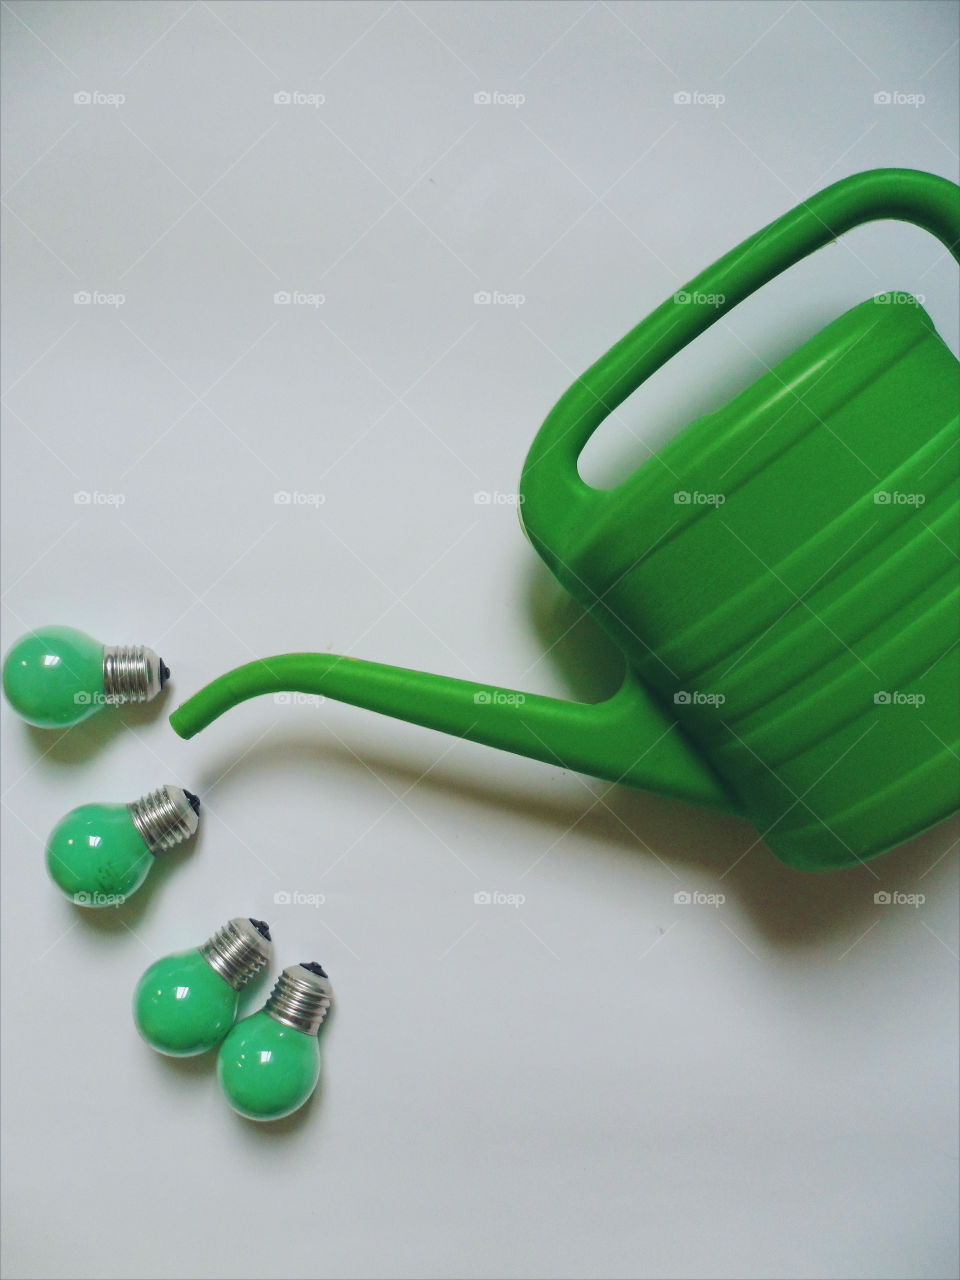 Green light bulbs and a green watering can for watering flowers